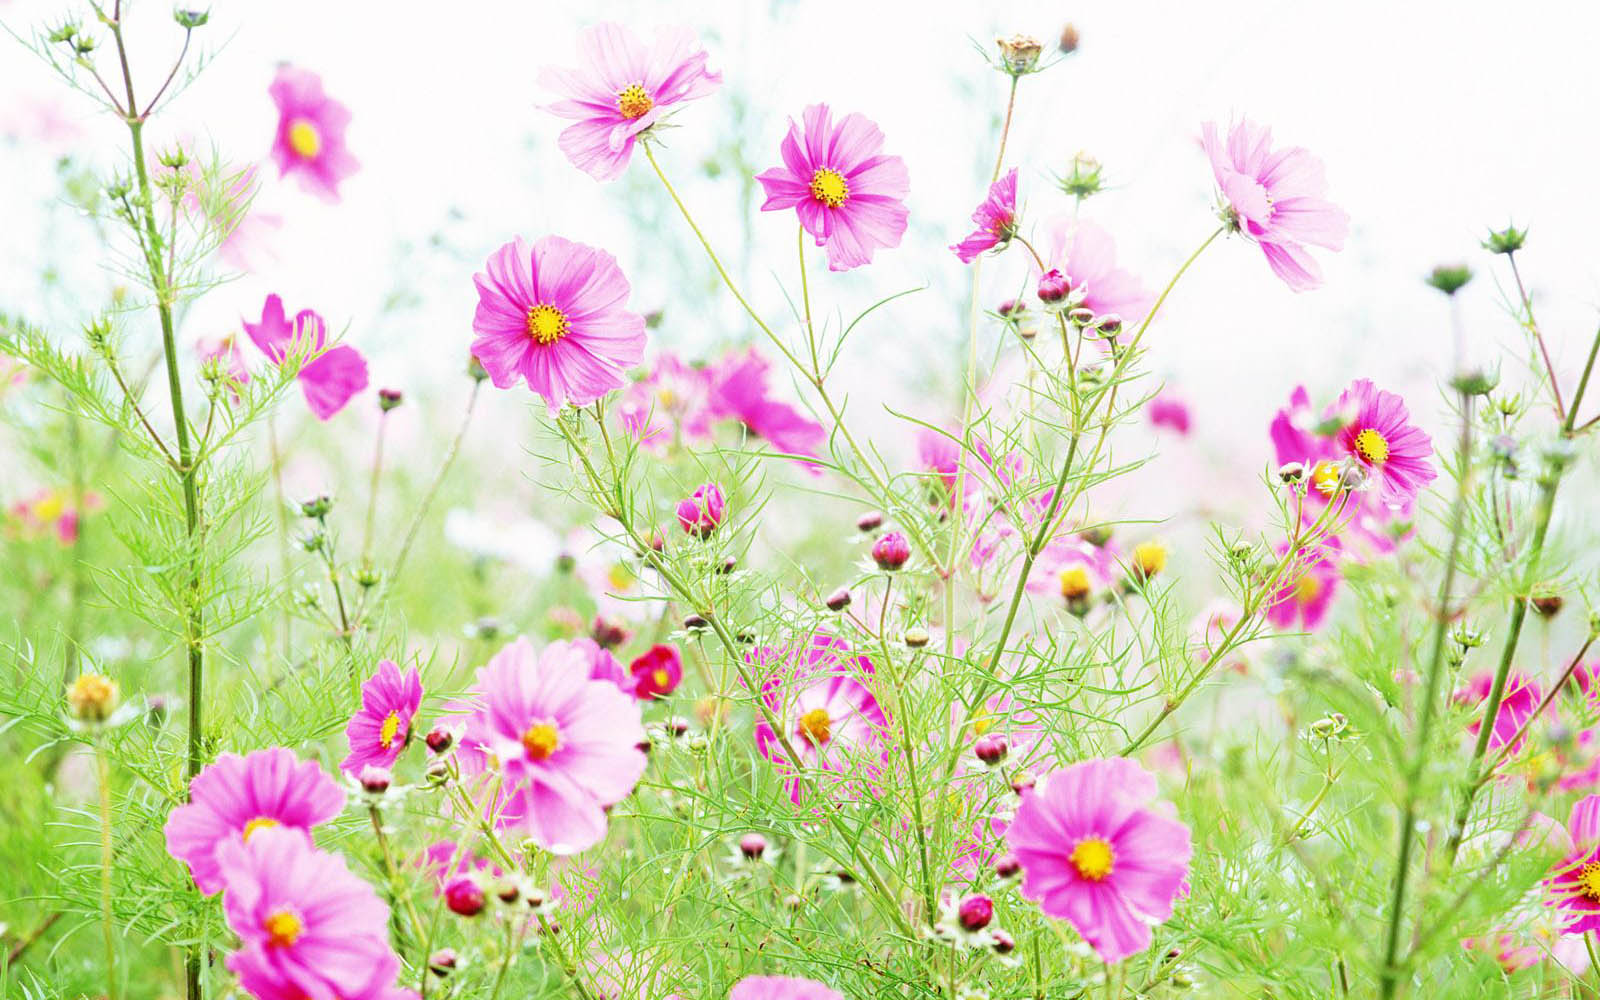 Wildflowers Wallpaper Image To